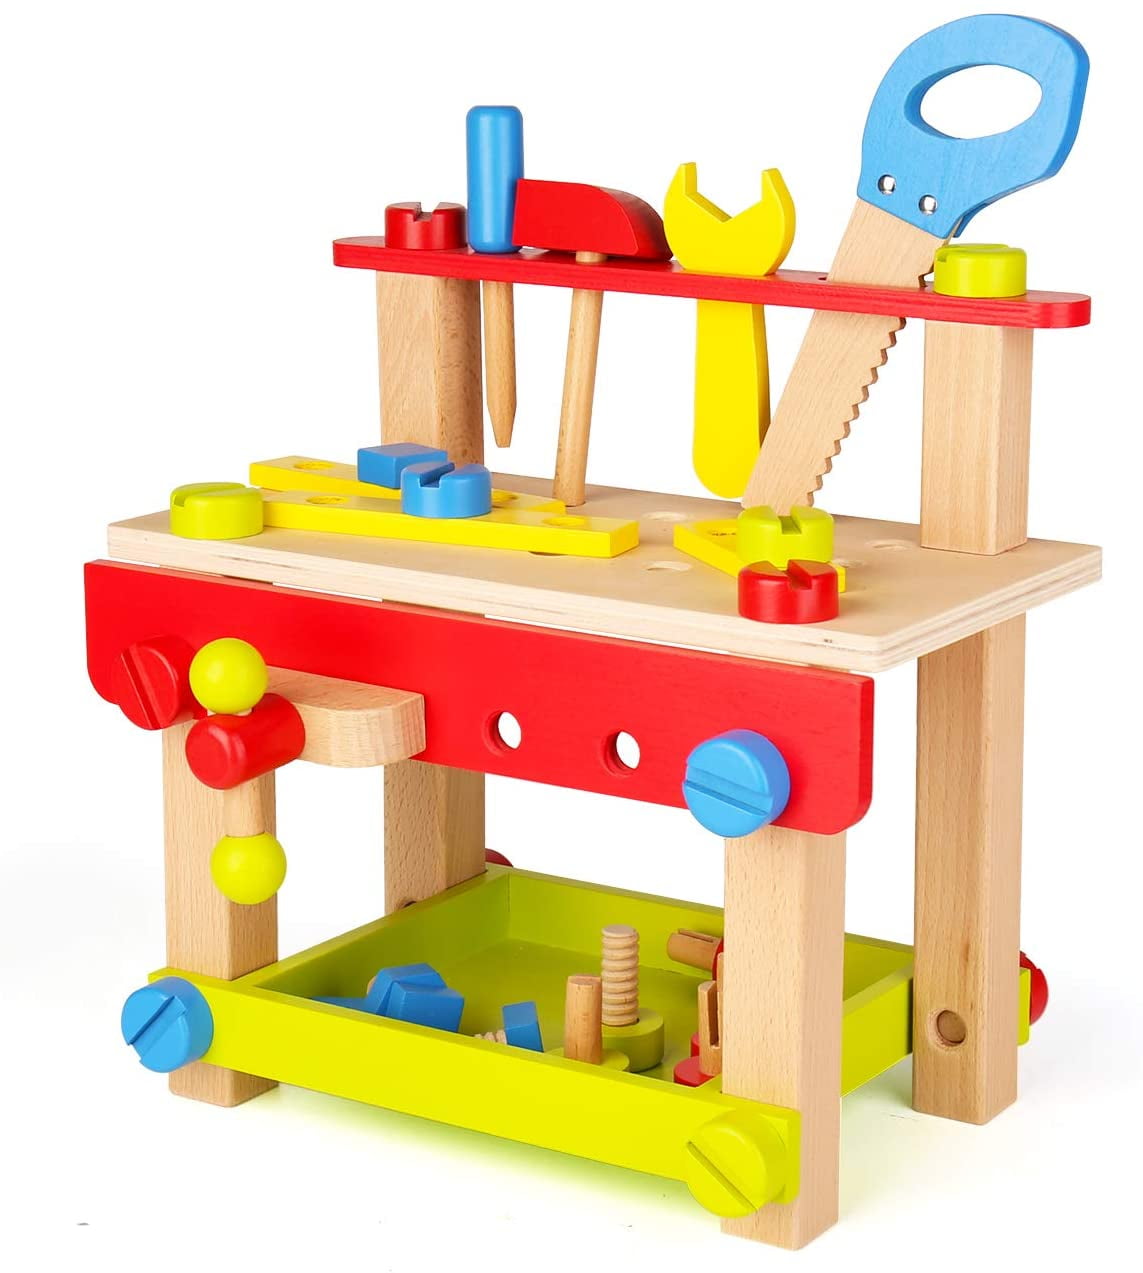 Wooden Construction Tools Play Set Preschool Toys for Young Children Boys 